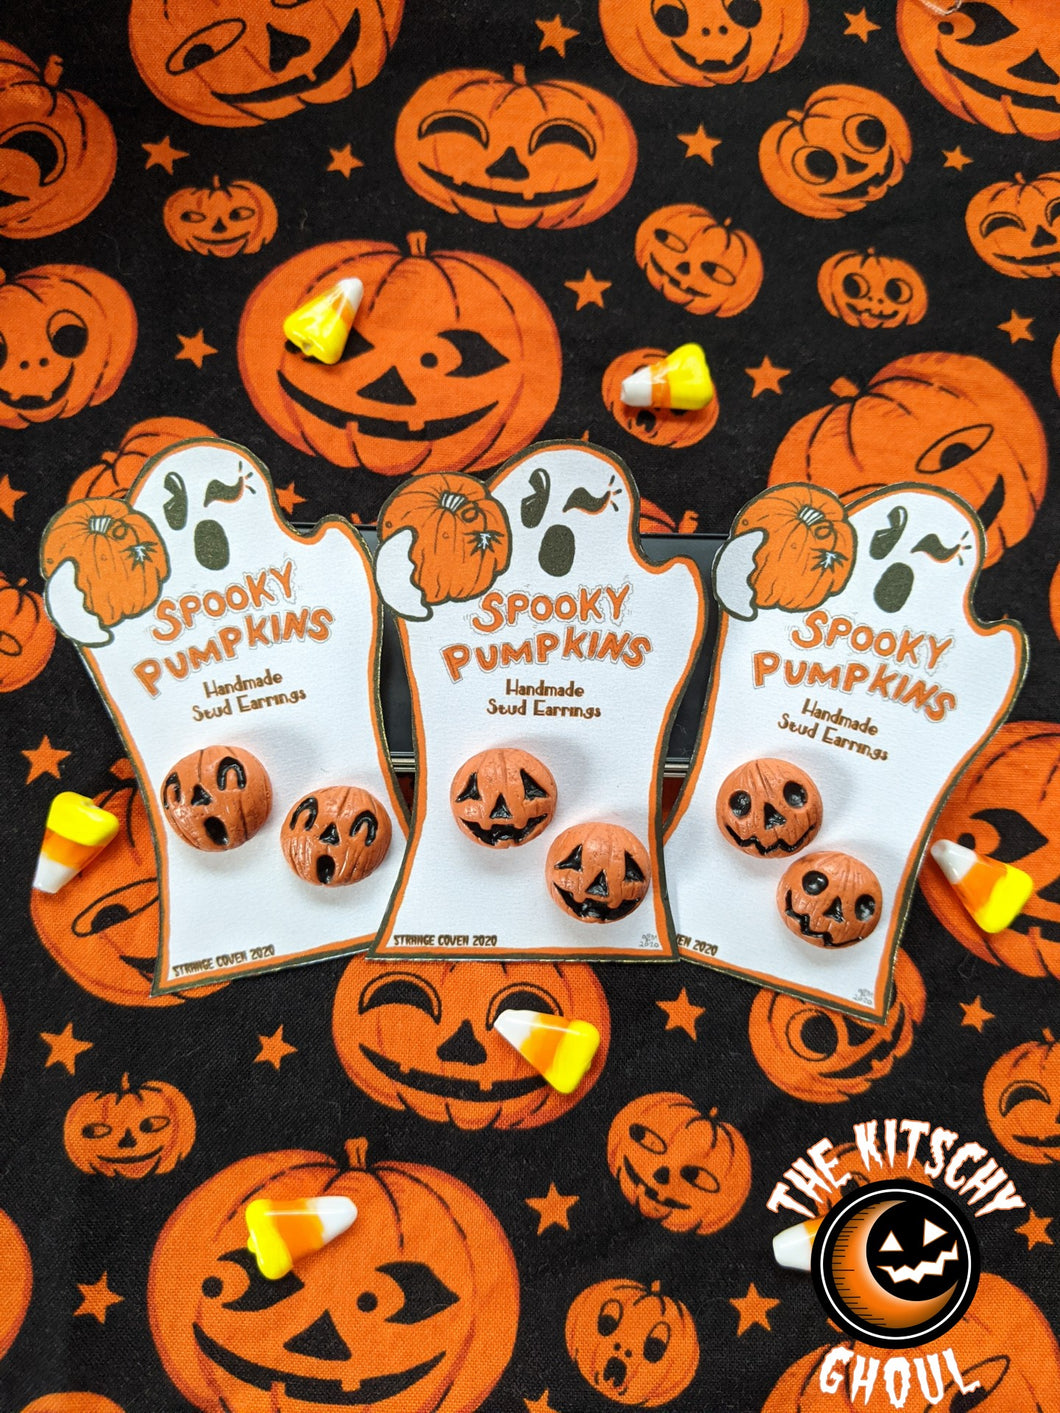 3 pairs of Hand sculpted Spooky Pumpkin Earrings on their ghost shaped cards, among candy corn on a vintage pumpkin print fabric background